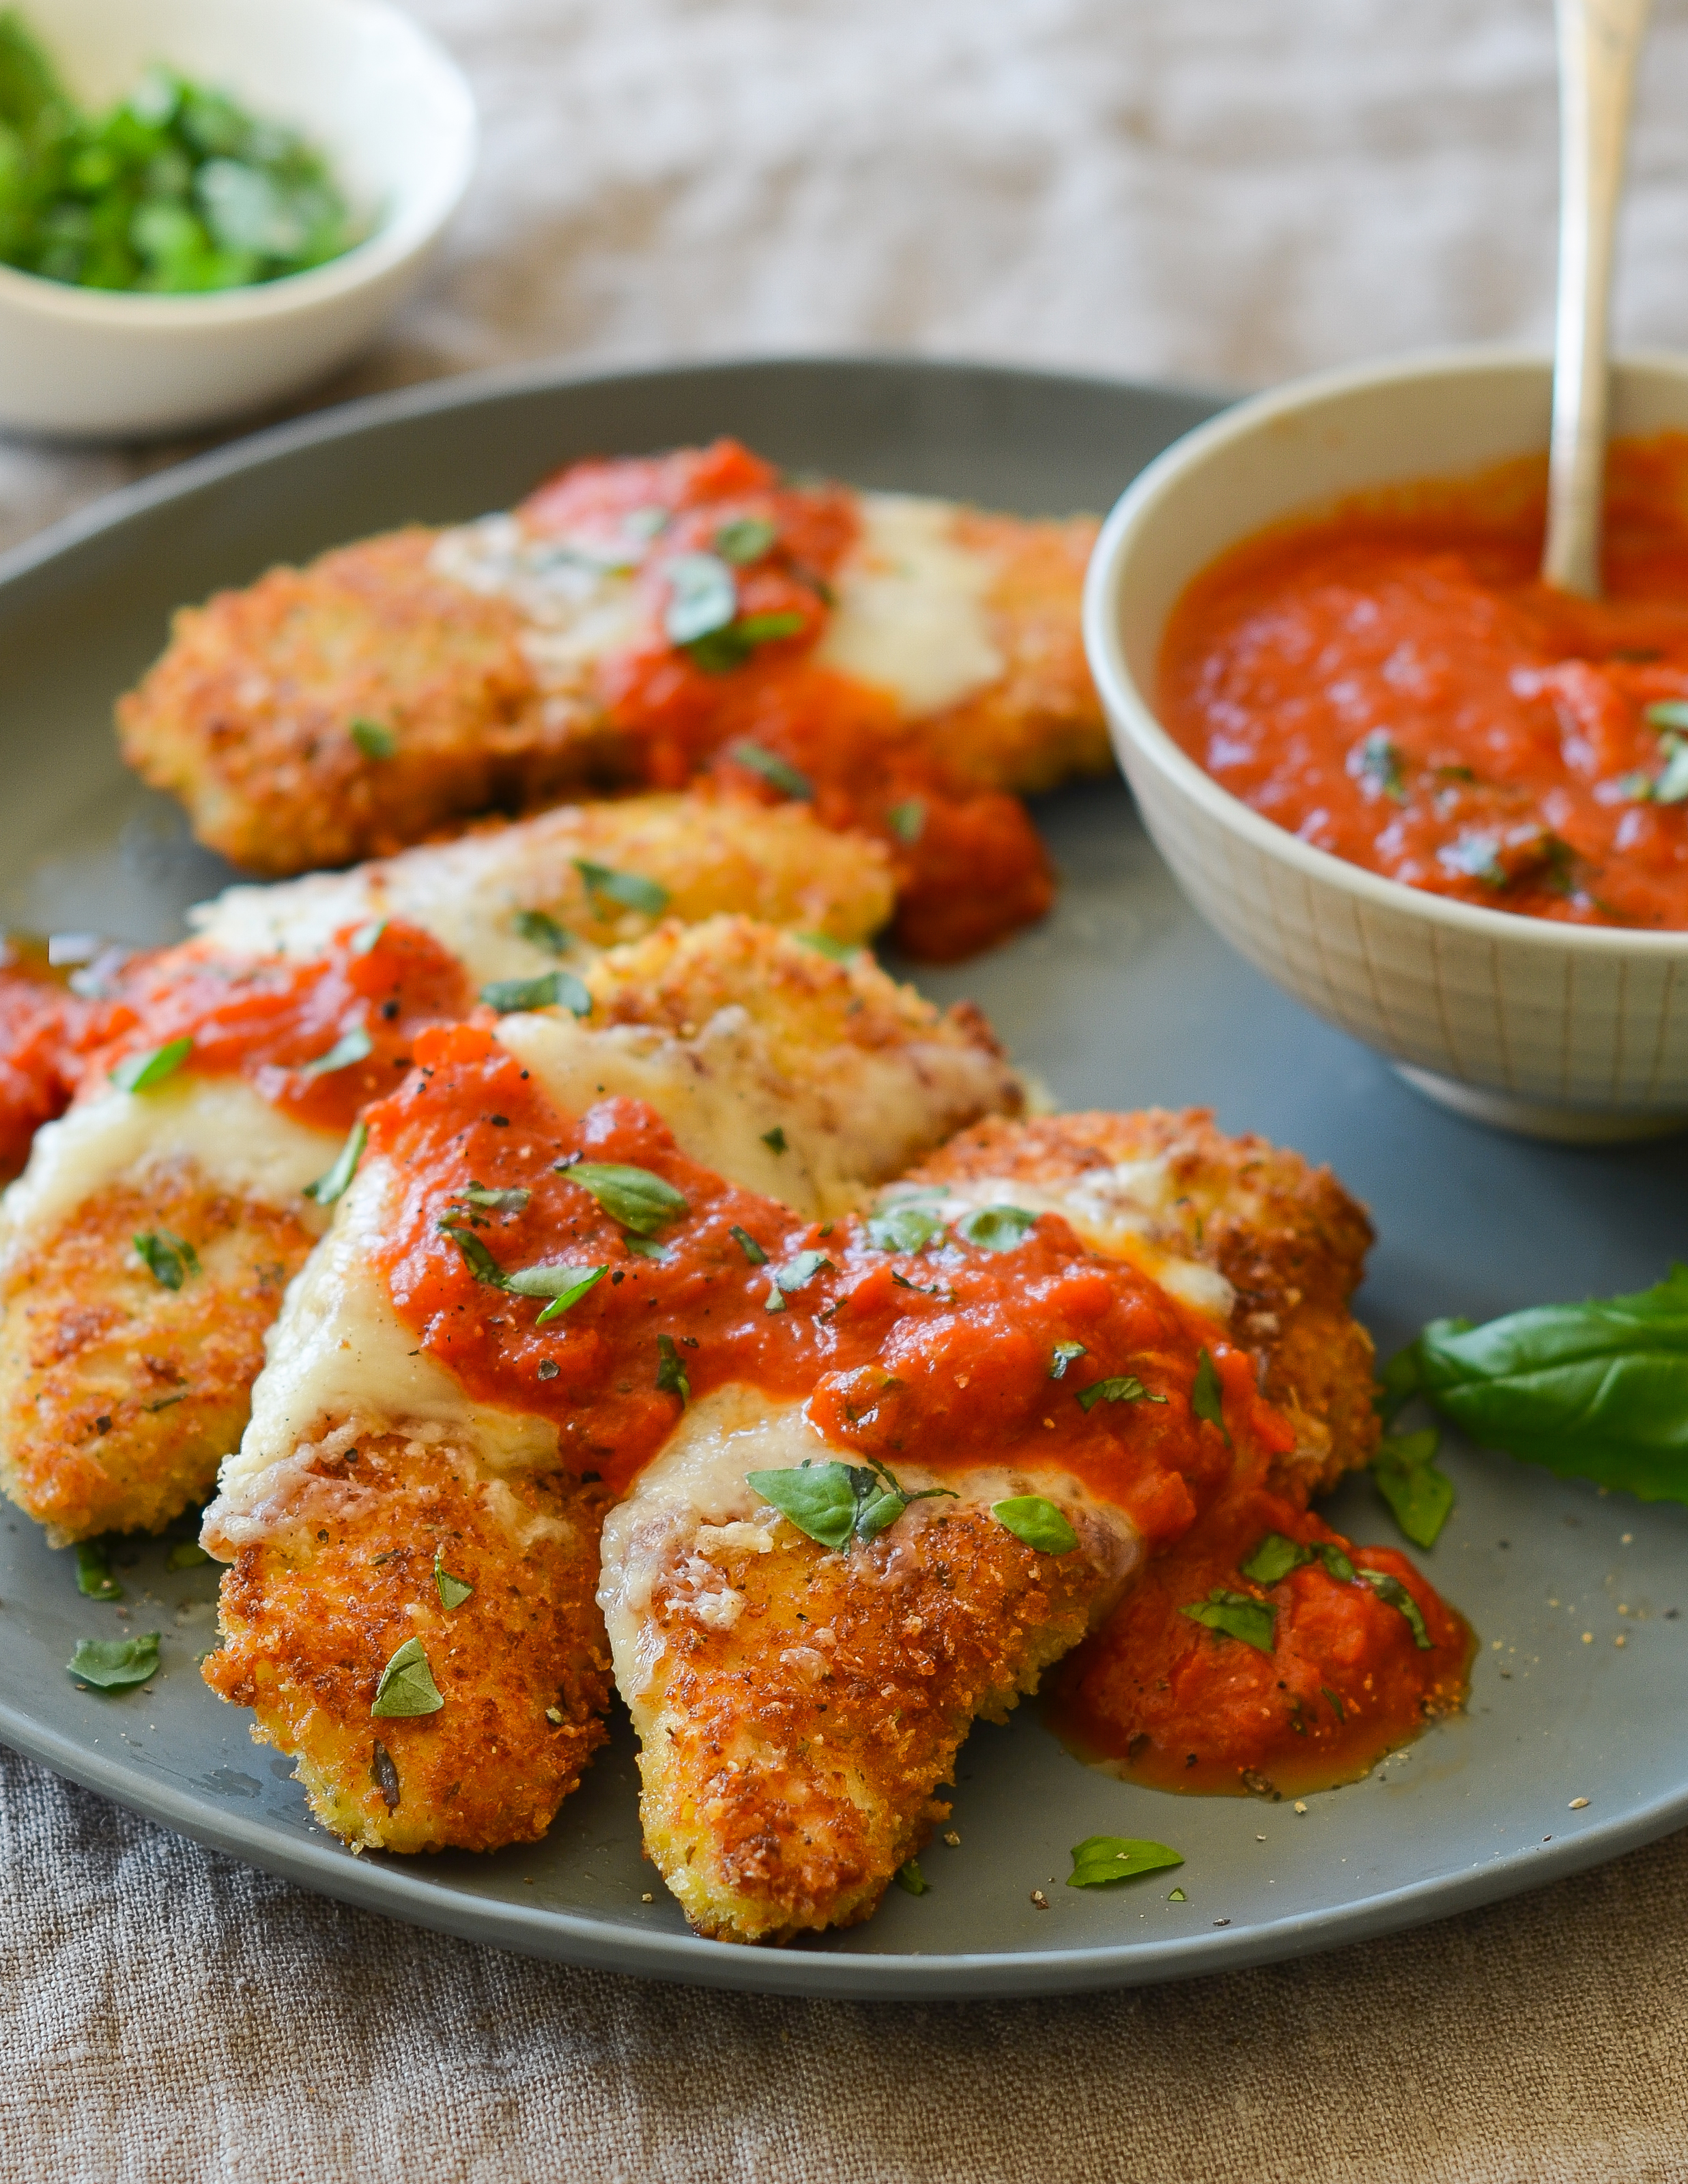 Easy Chicken Parmesan Recipe Once Upon A Chef,Italian Parsley Vs Parsley